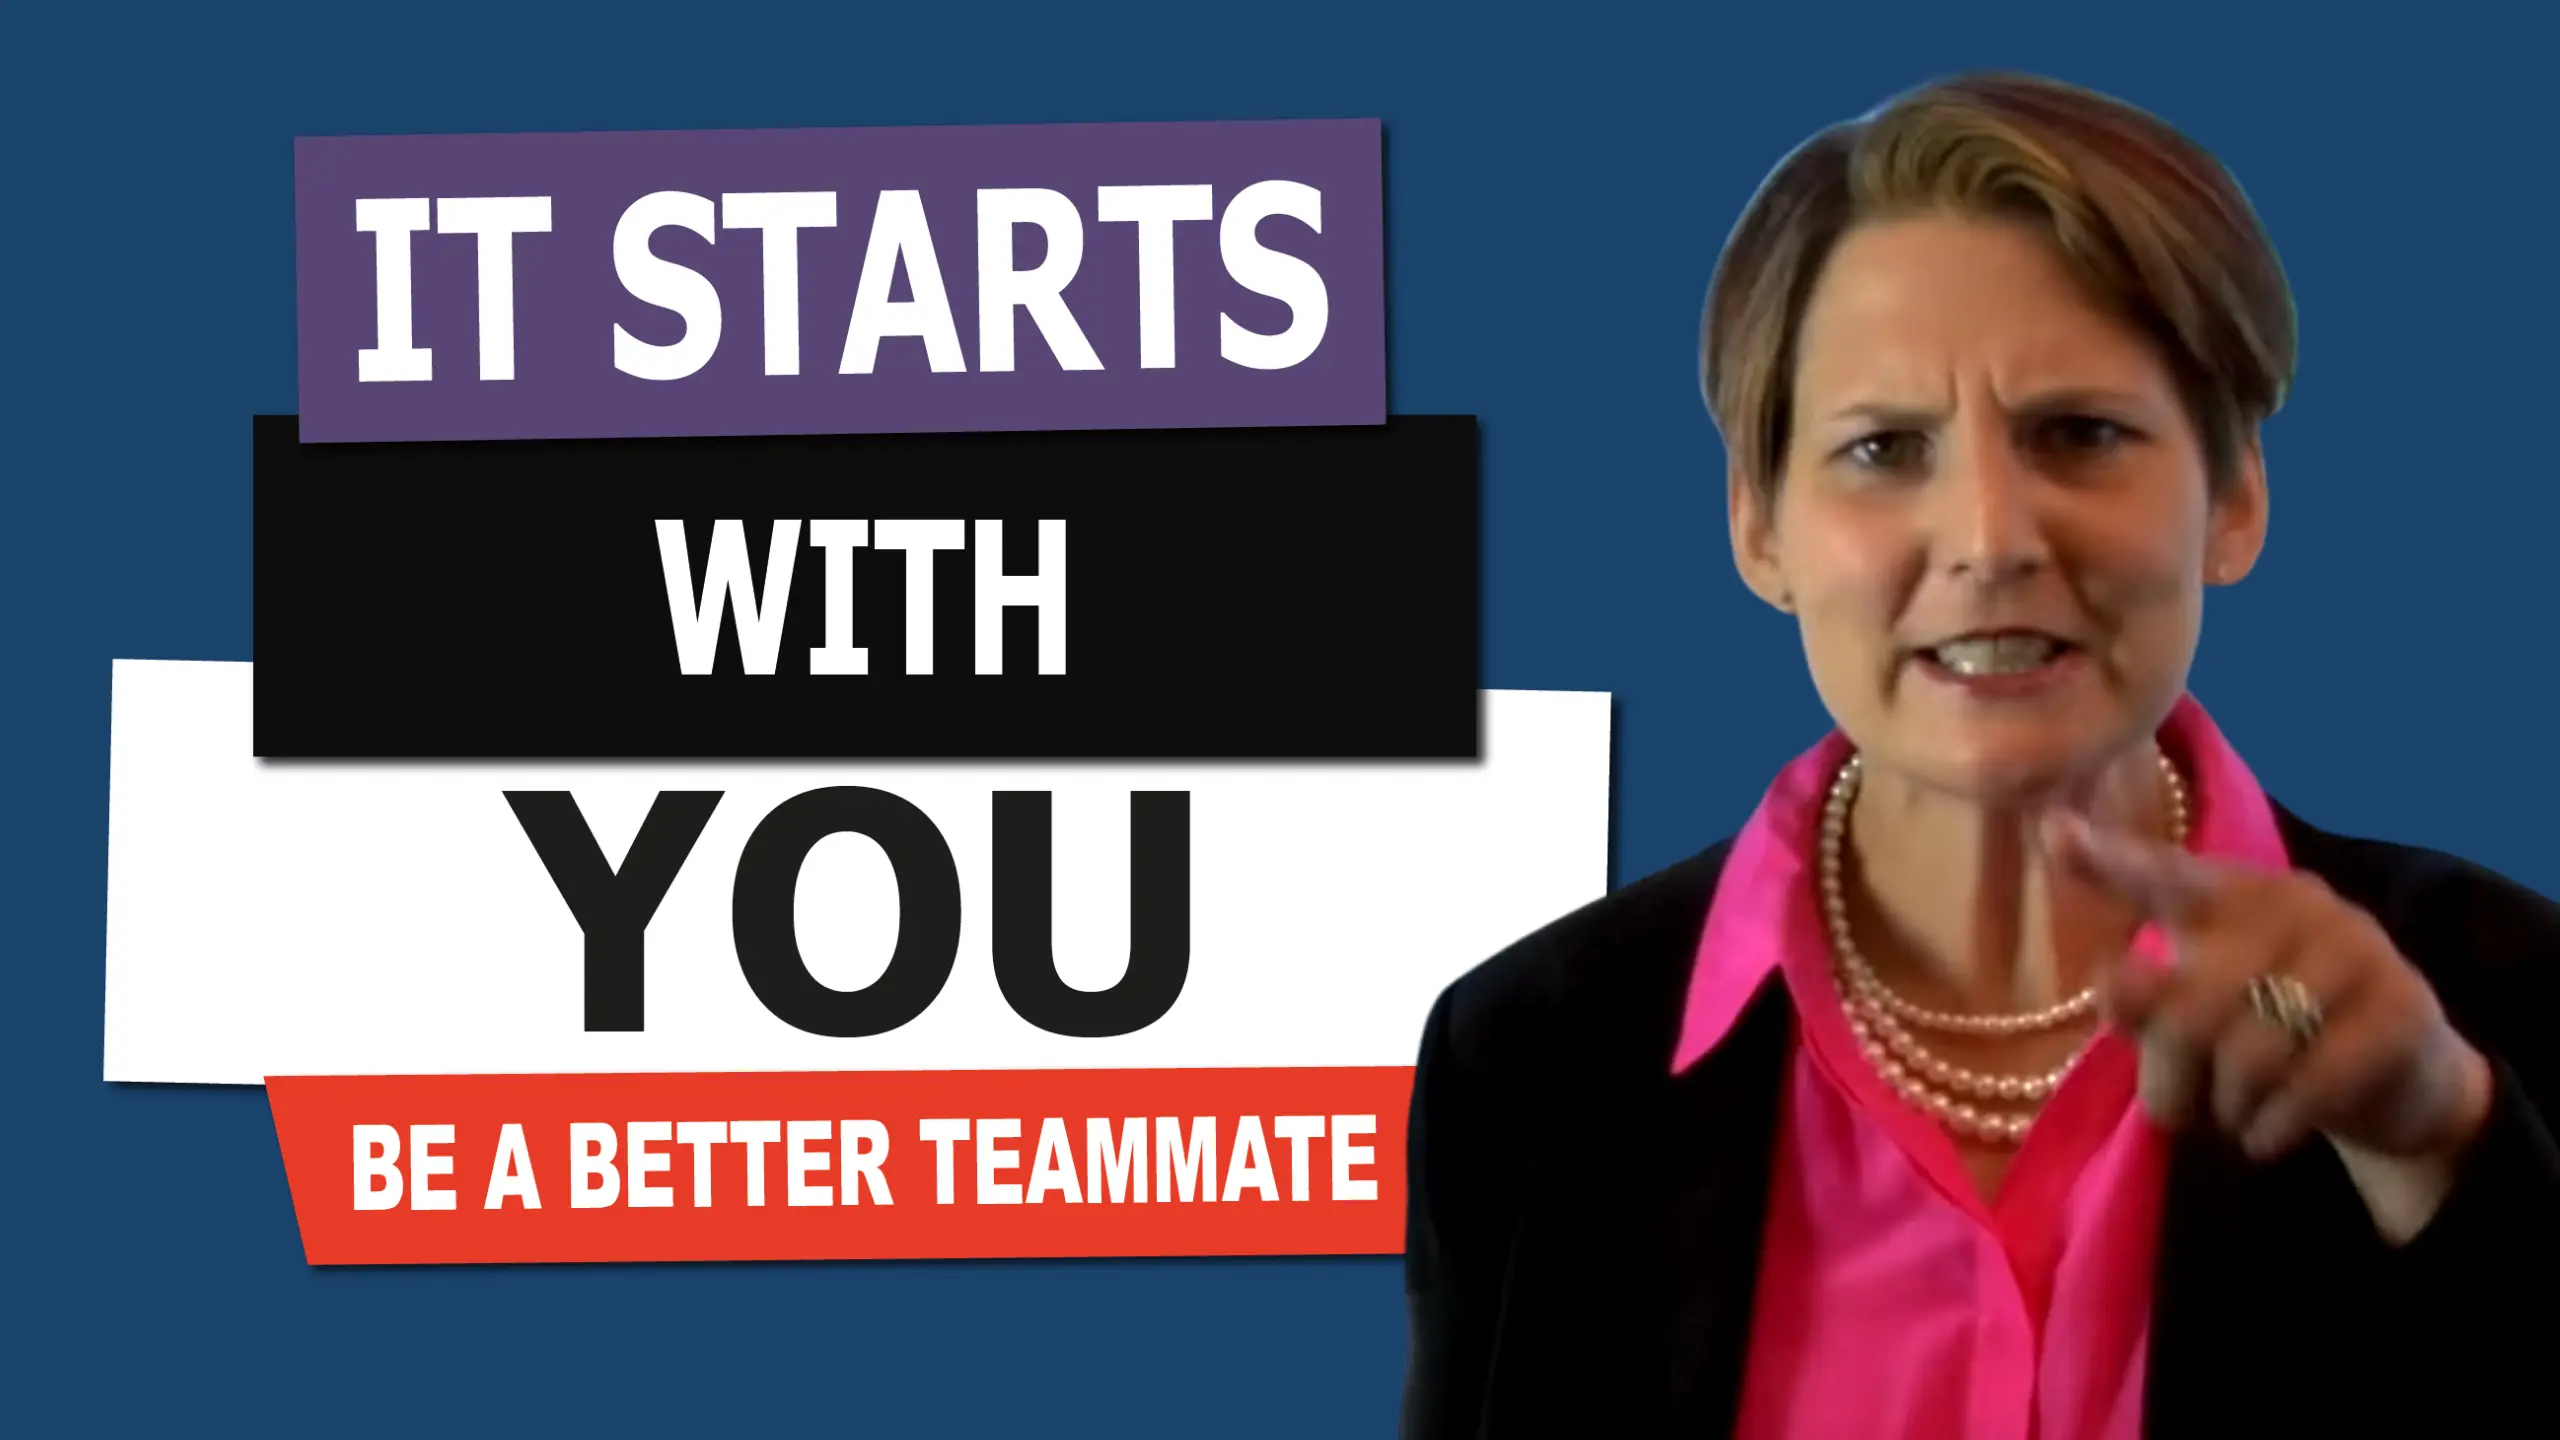 The You In Team